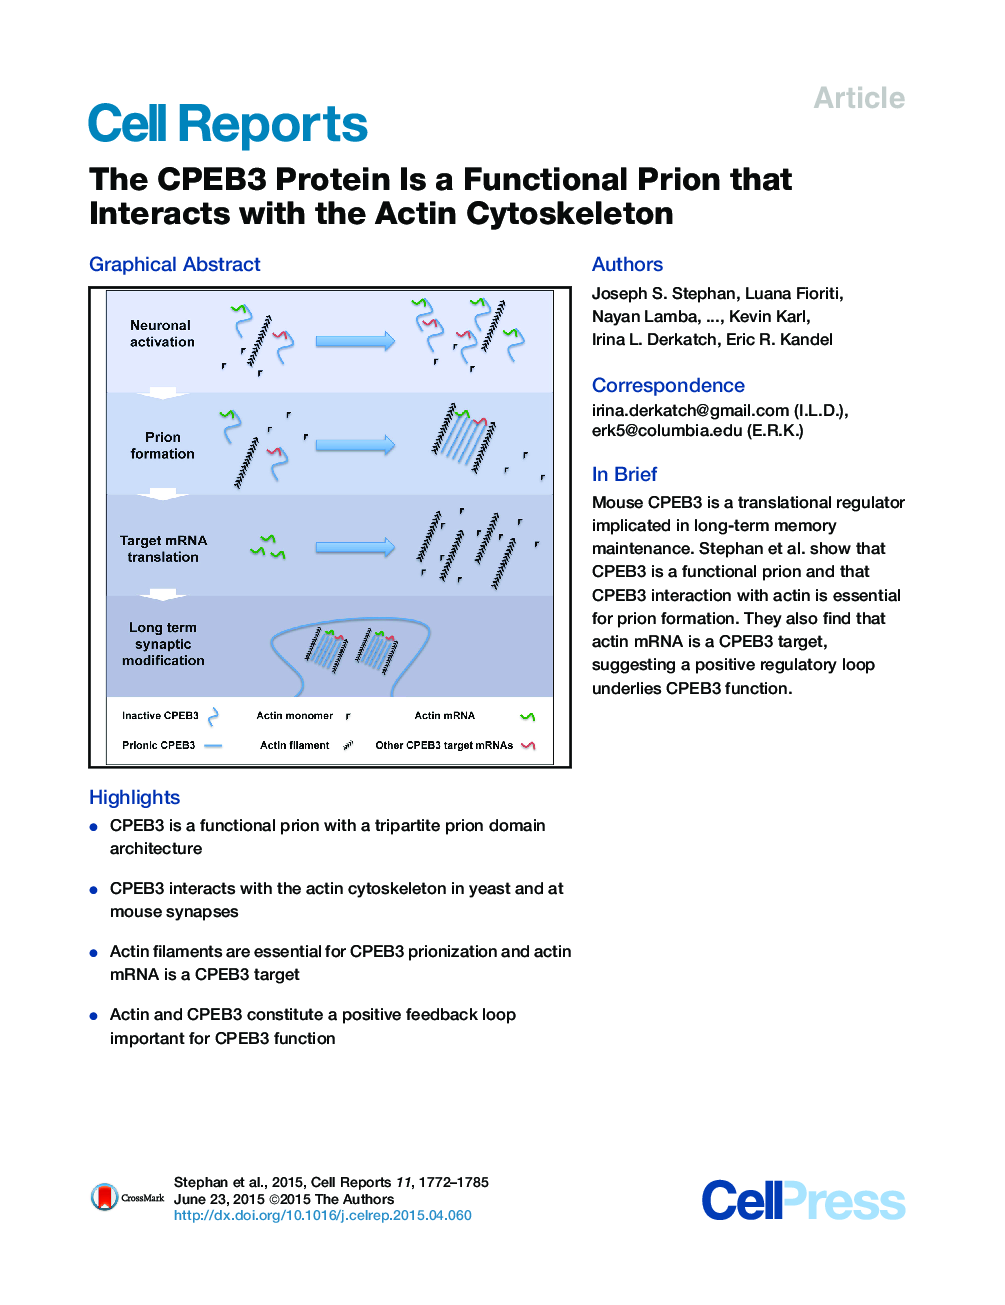 The CPEB3 Protein Is a Functional Prion that Interacts with the Actin Cytoskeleton 